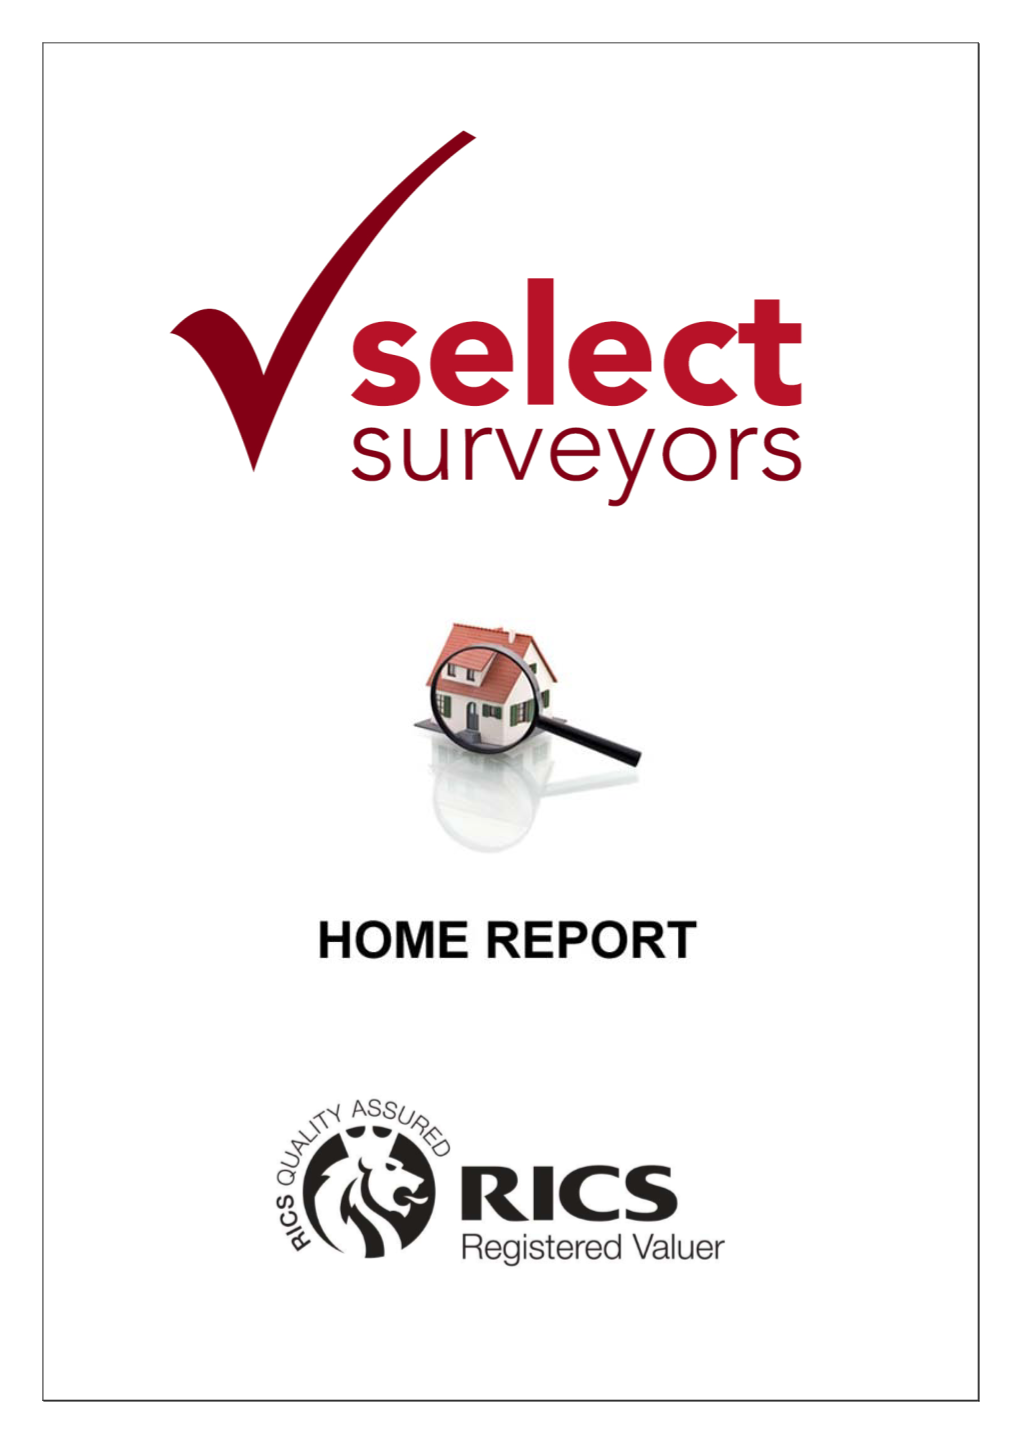 Download Home Report